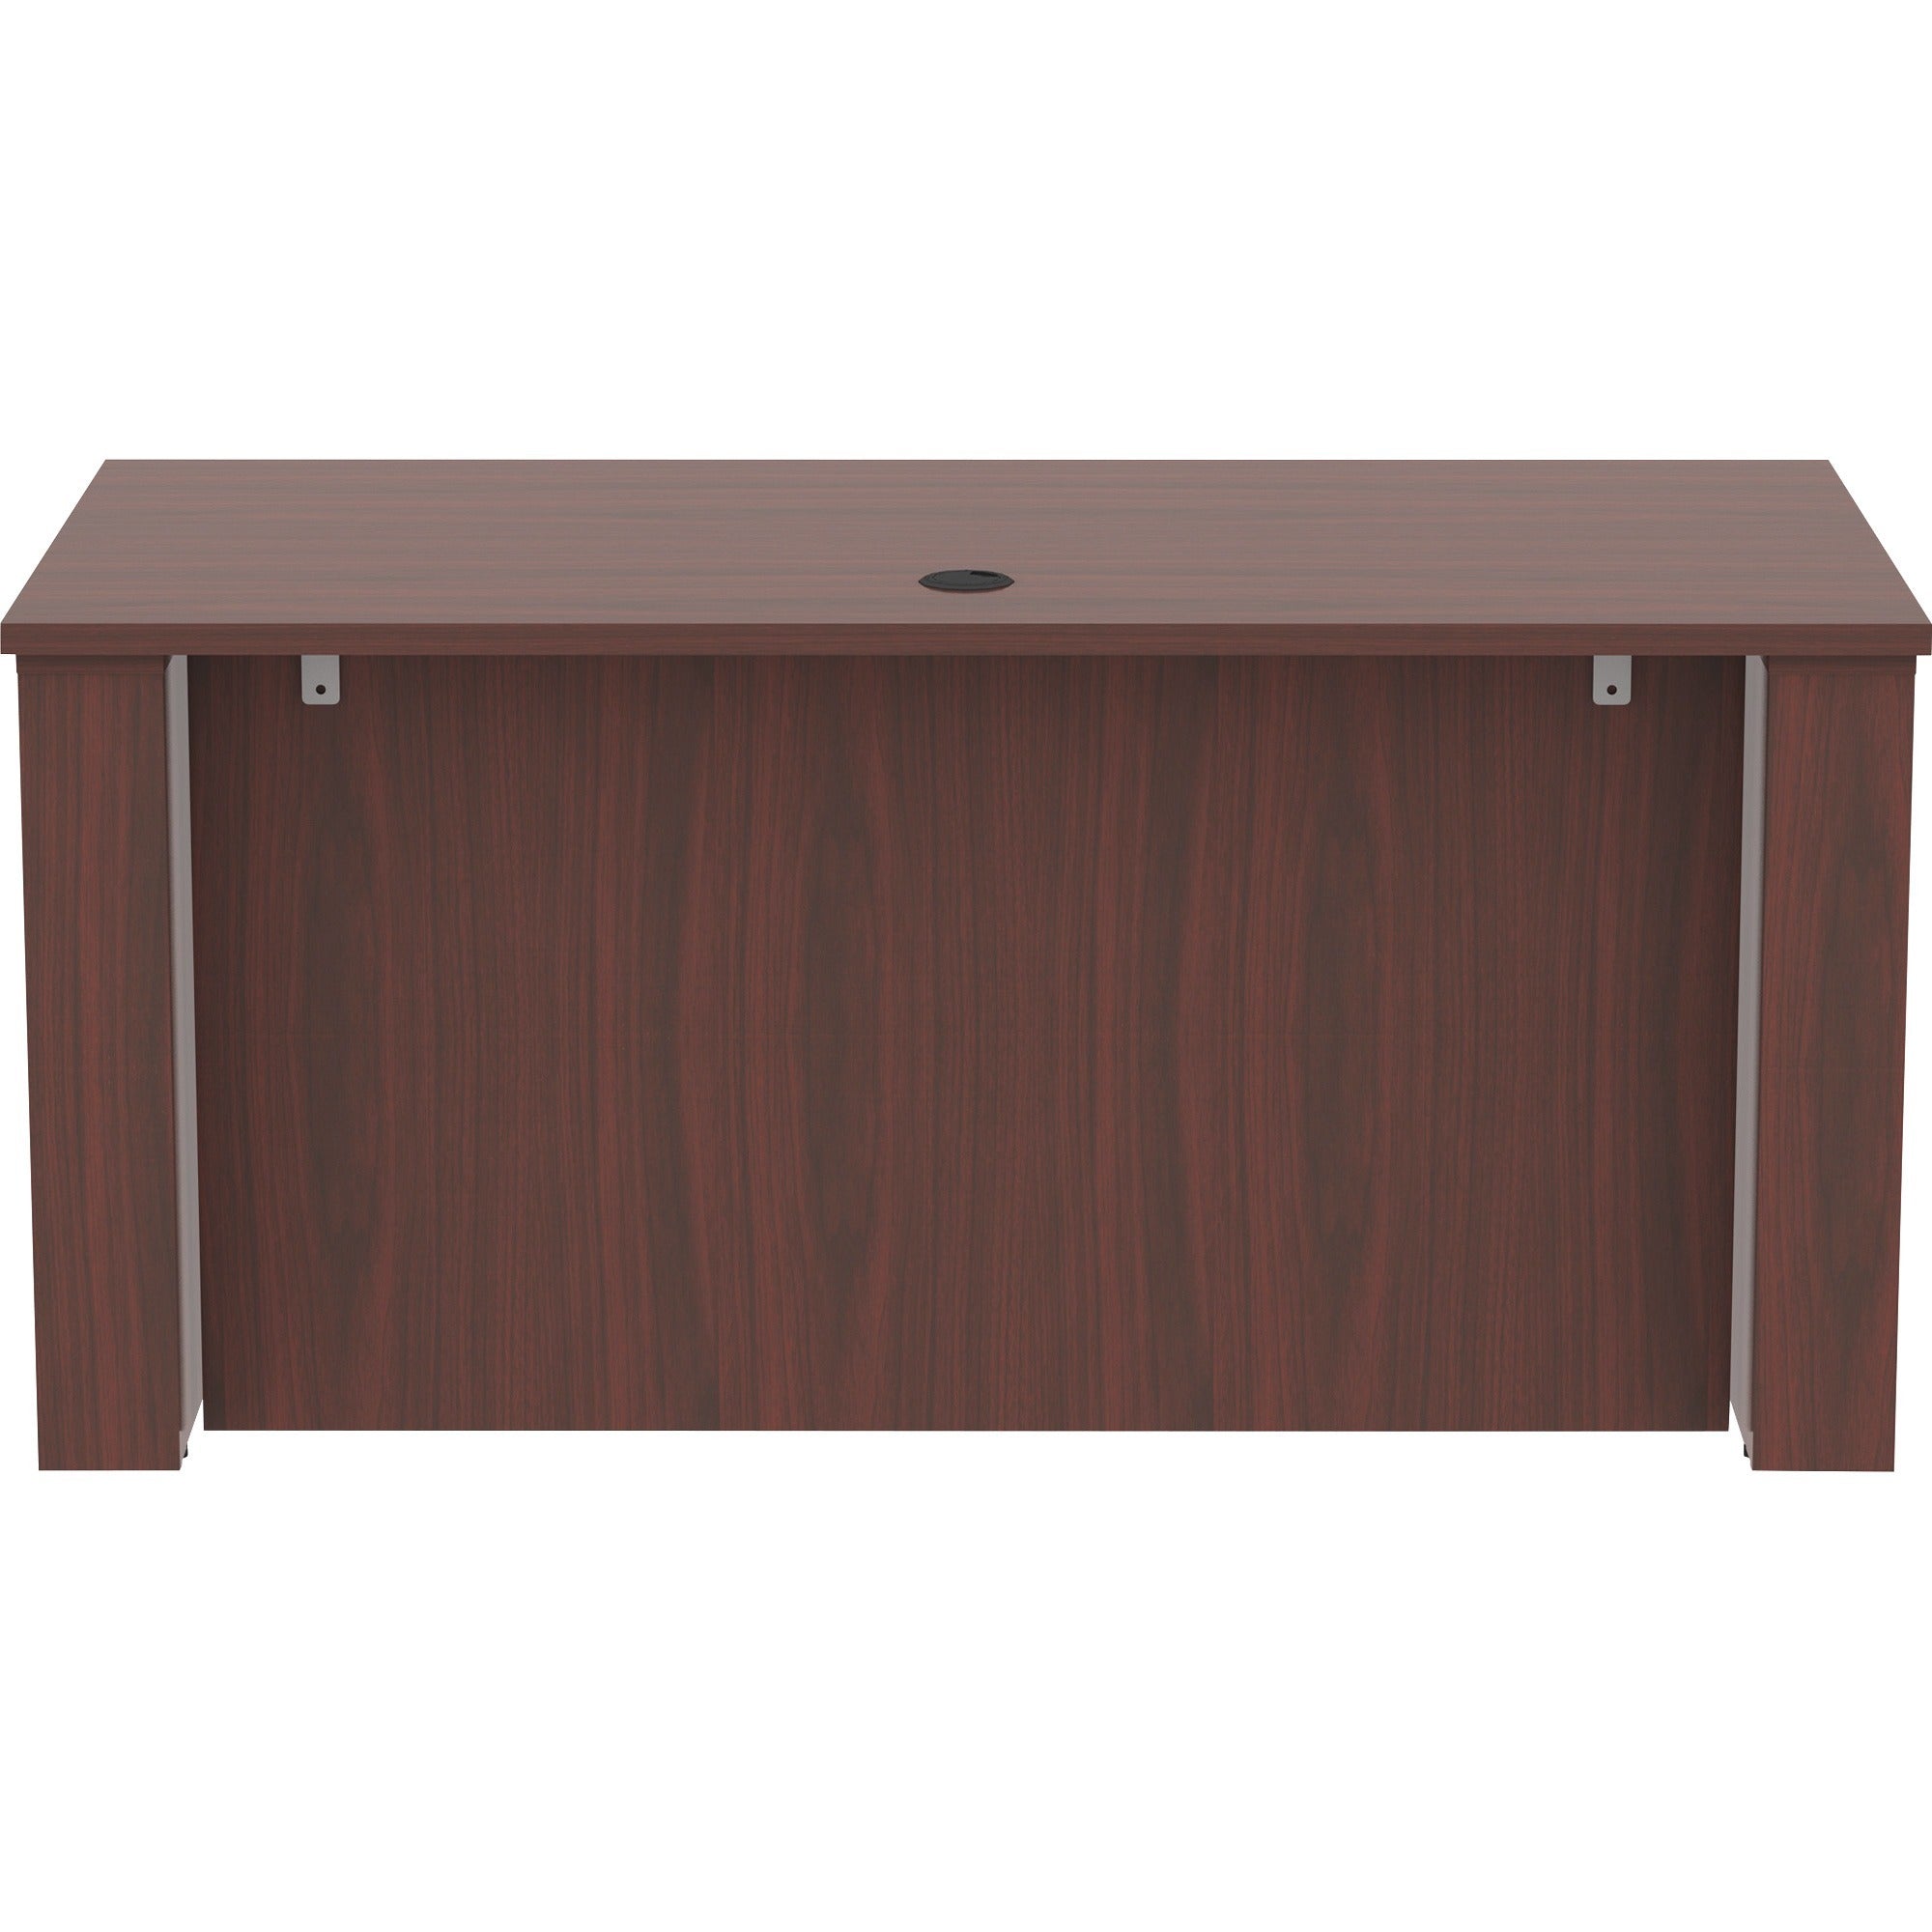 lorell-essentials-series-sit-to-stand-desk-shell-01-top-1-edge-60-x-2949-finish-mahogany-mahogany-laminate-table-top_llr69571 - 4